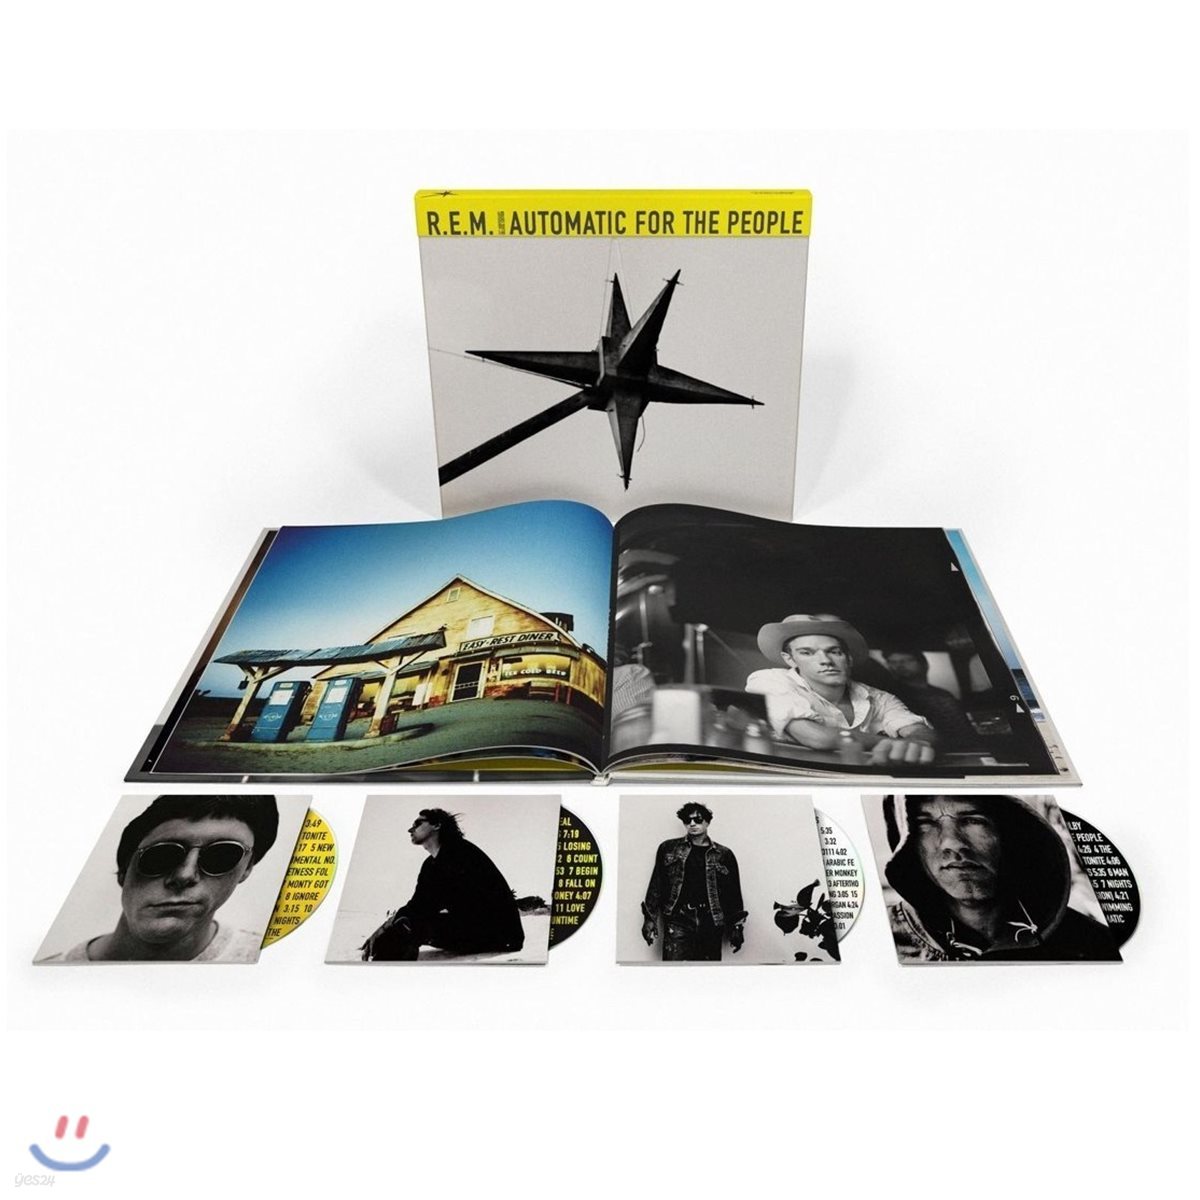 R.E.M. - Automatic For The People [발매 25주년 기념 3CD+Blu-ray 디럭스 에디션]